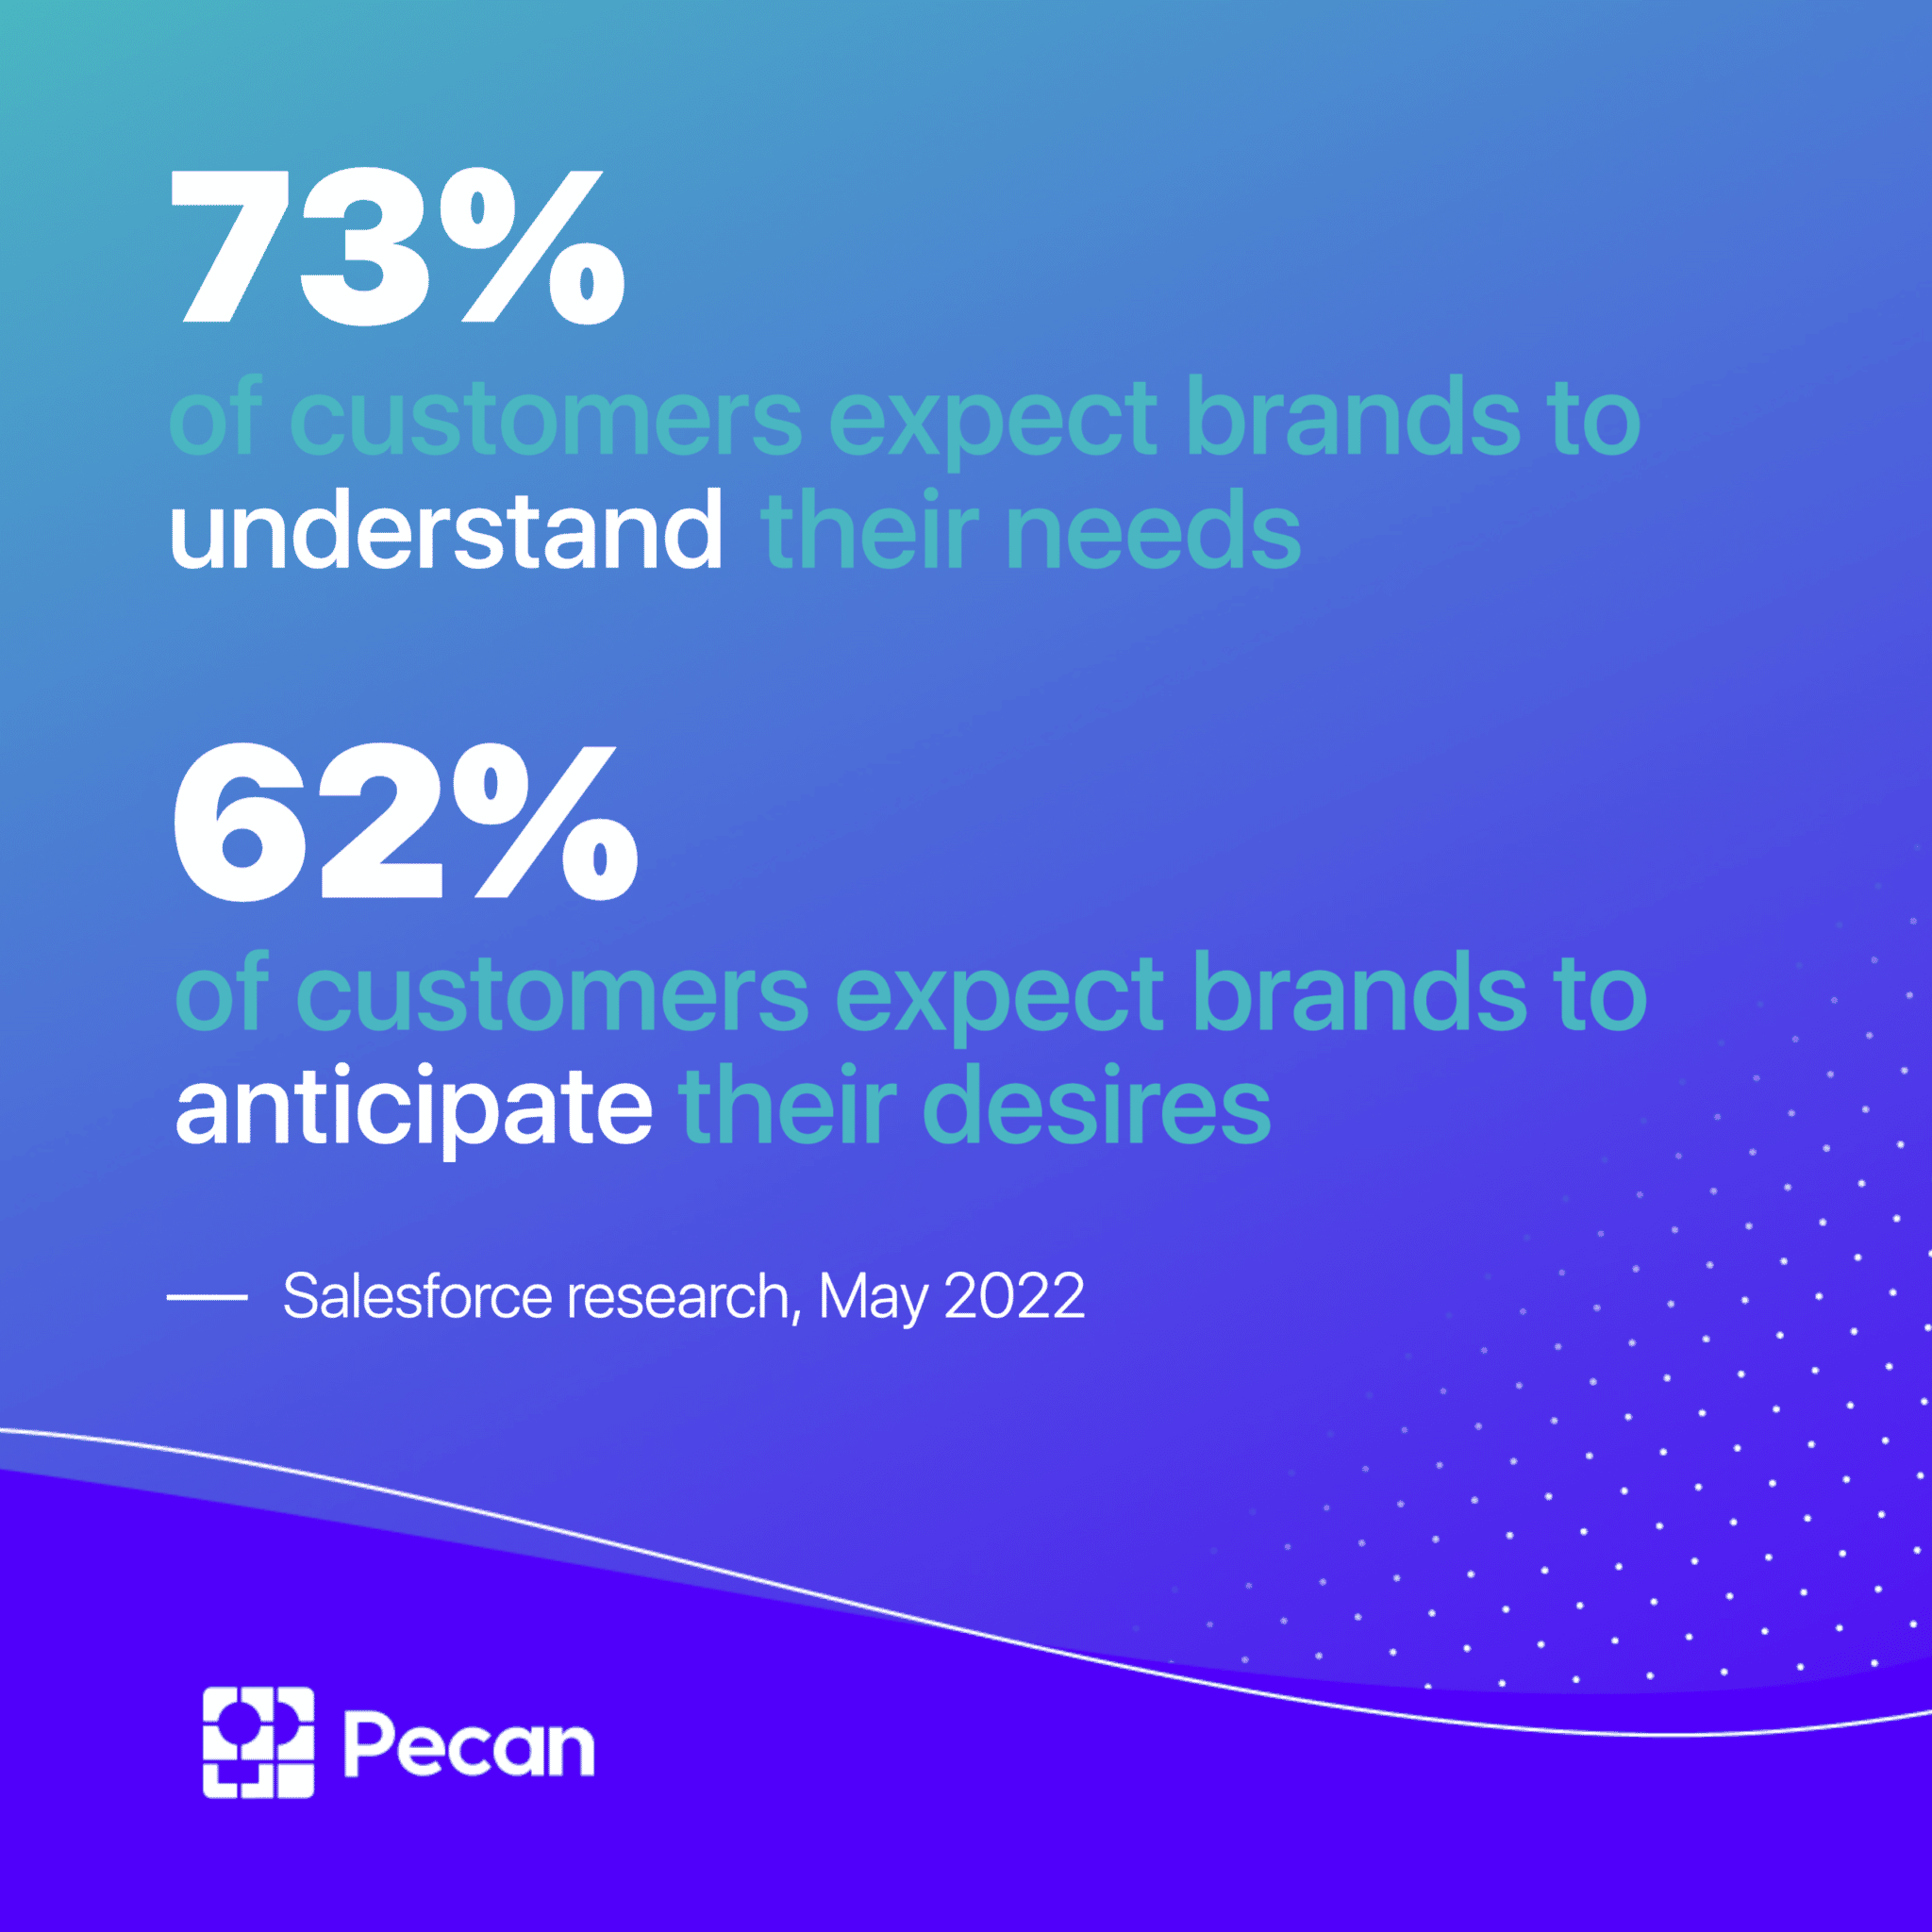 73% of customer expect brands to understand their needs